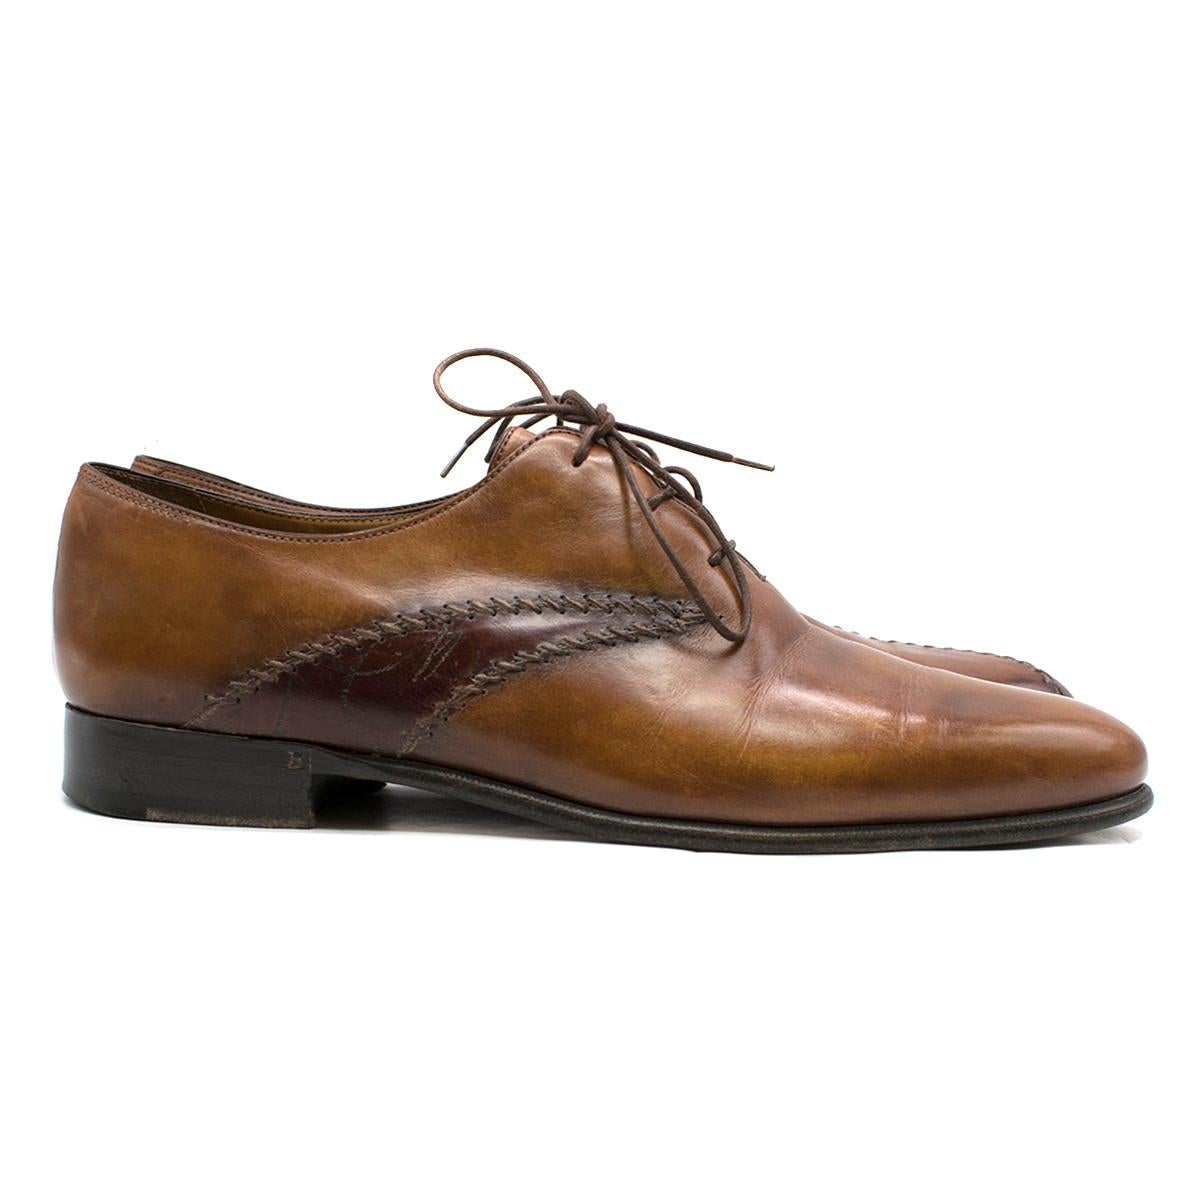 Berluti Brown Leather Derby Shoes

- Brown leather derby shoes
- Front lace up
- Round toe
- Stitching detailing
- Nude leather lining with logo embroidered
- Low heel
- This item comes with shoe trees and an alternative branded dust bag

Please